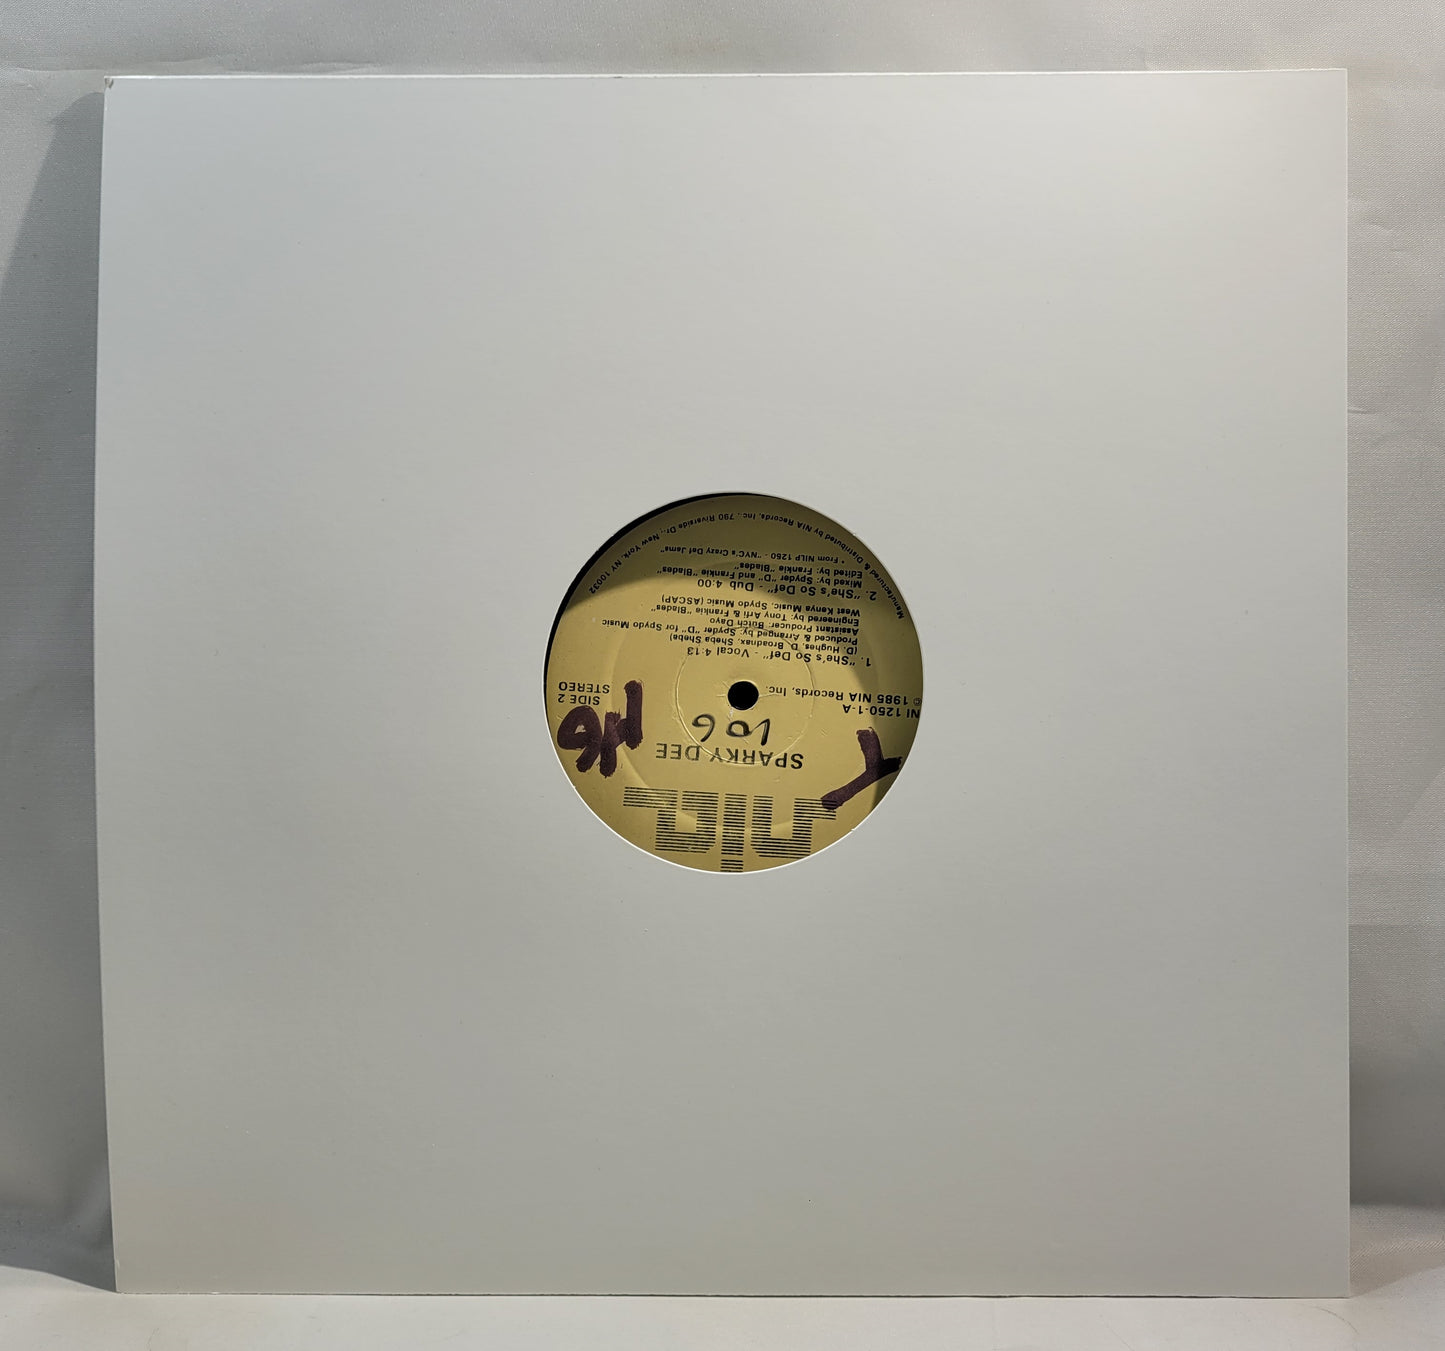 Sparky Dee Feat. Red Alert - She's so Def / He's My DJ [Vinyl Record 12" Single]